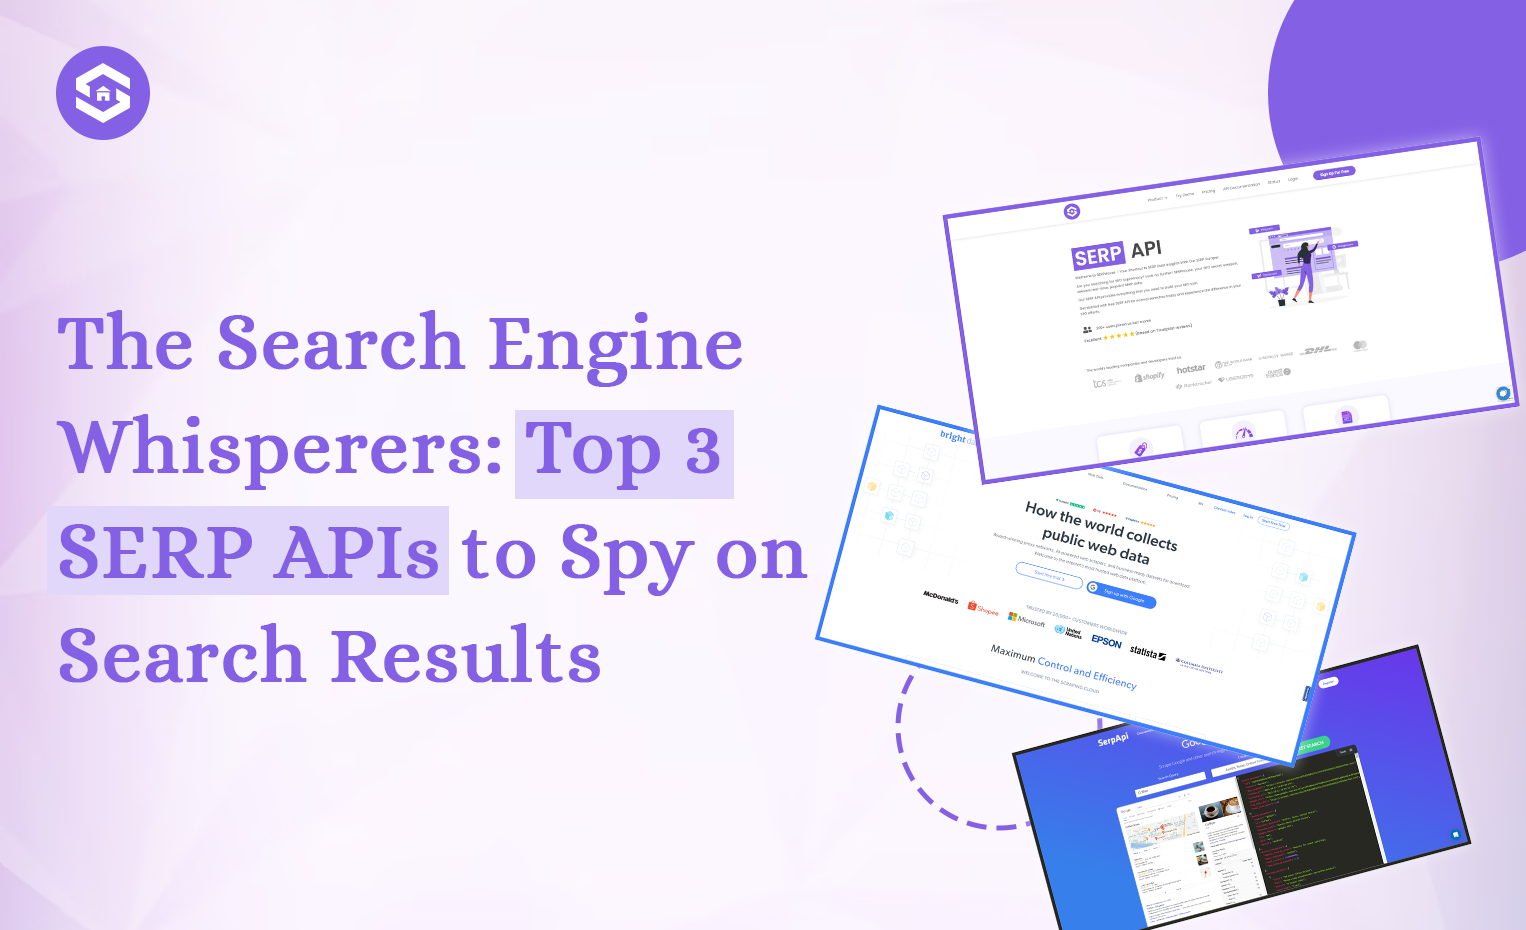 Demystifying the Web: Top 3 SERP APIs to Unlock Search Engine Insights